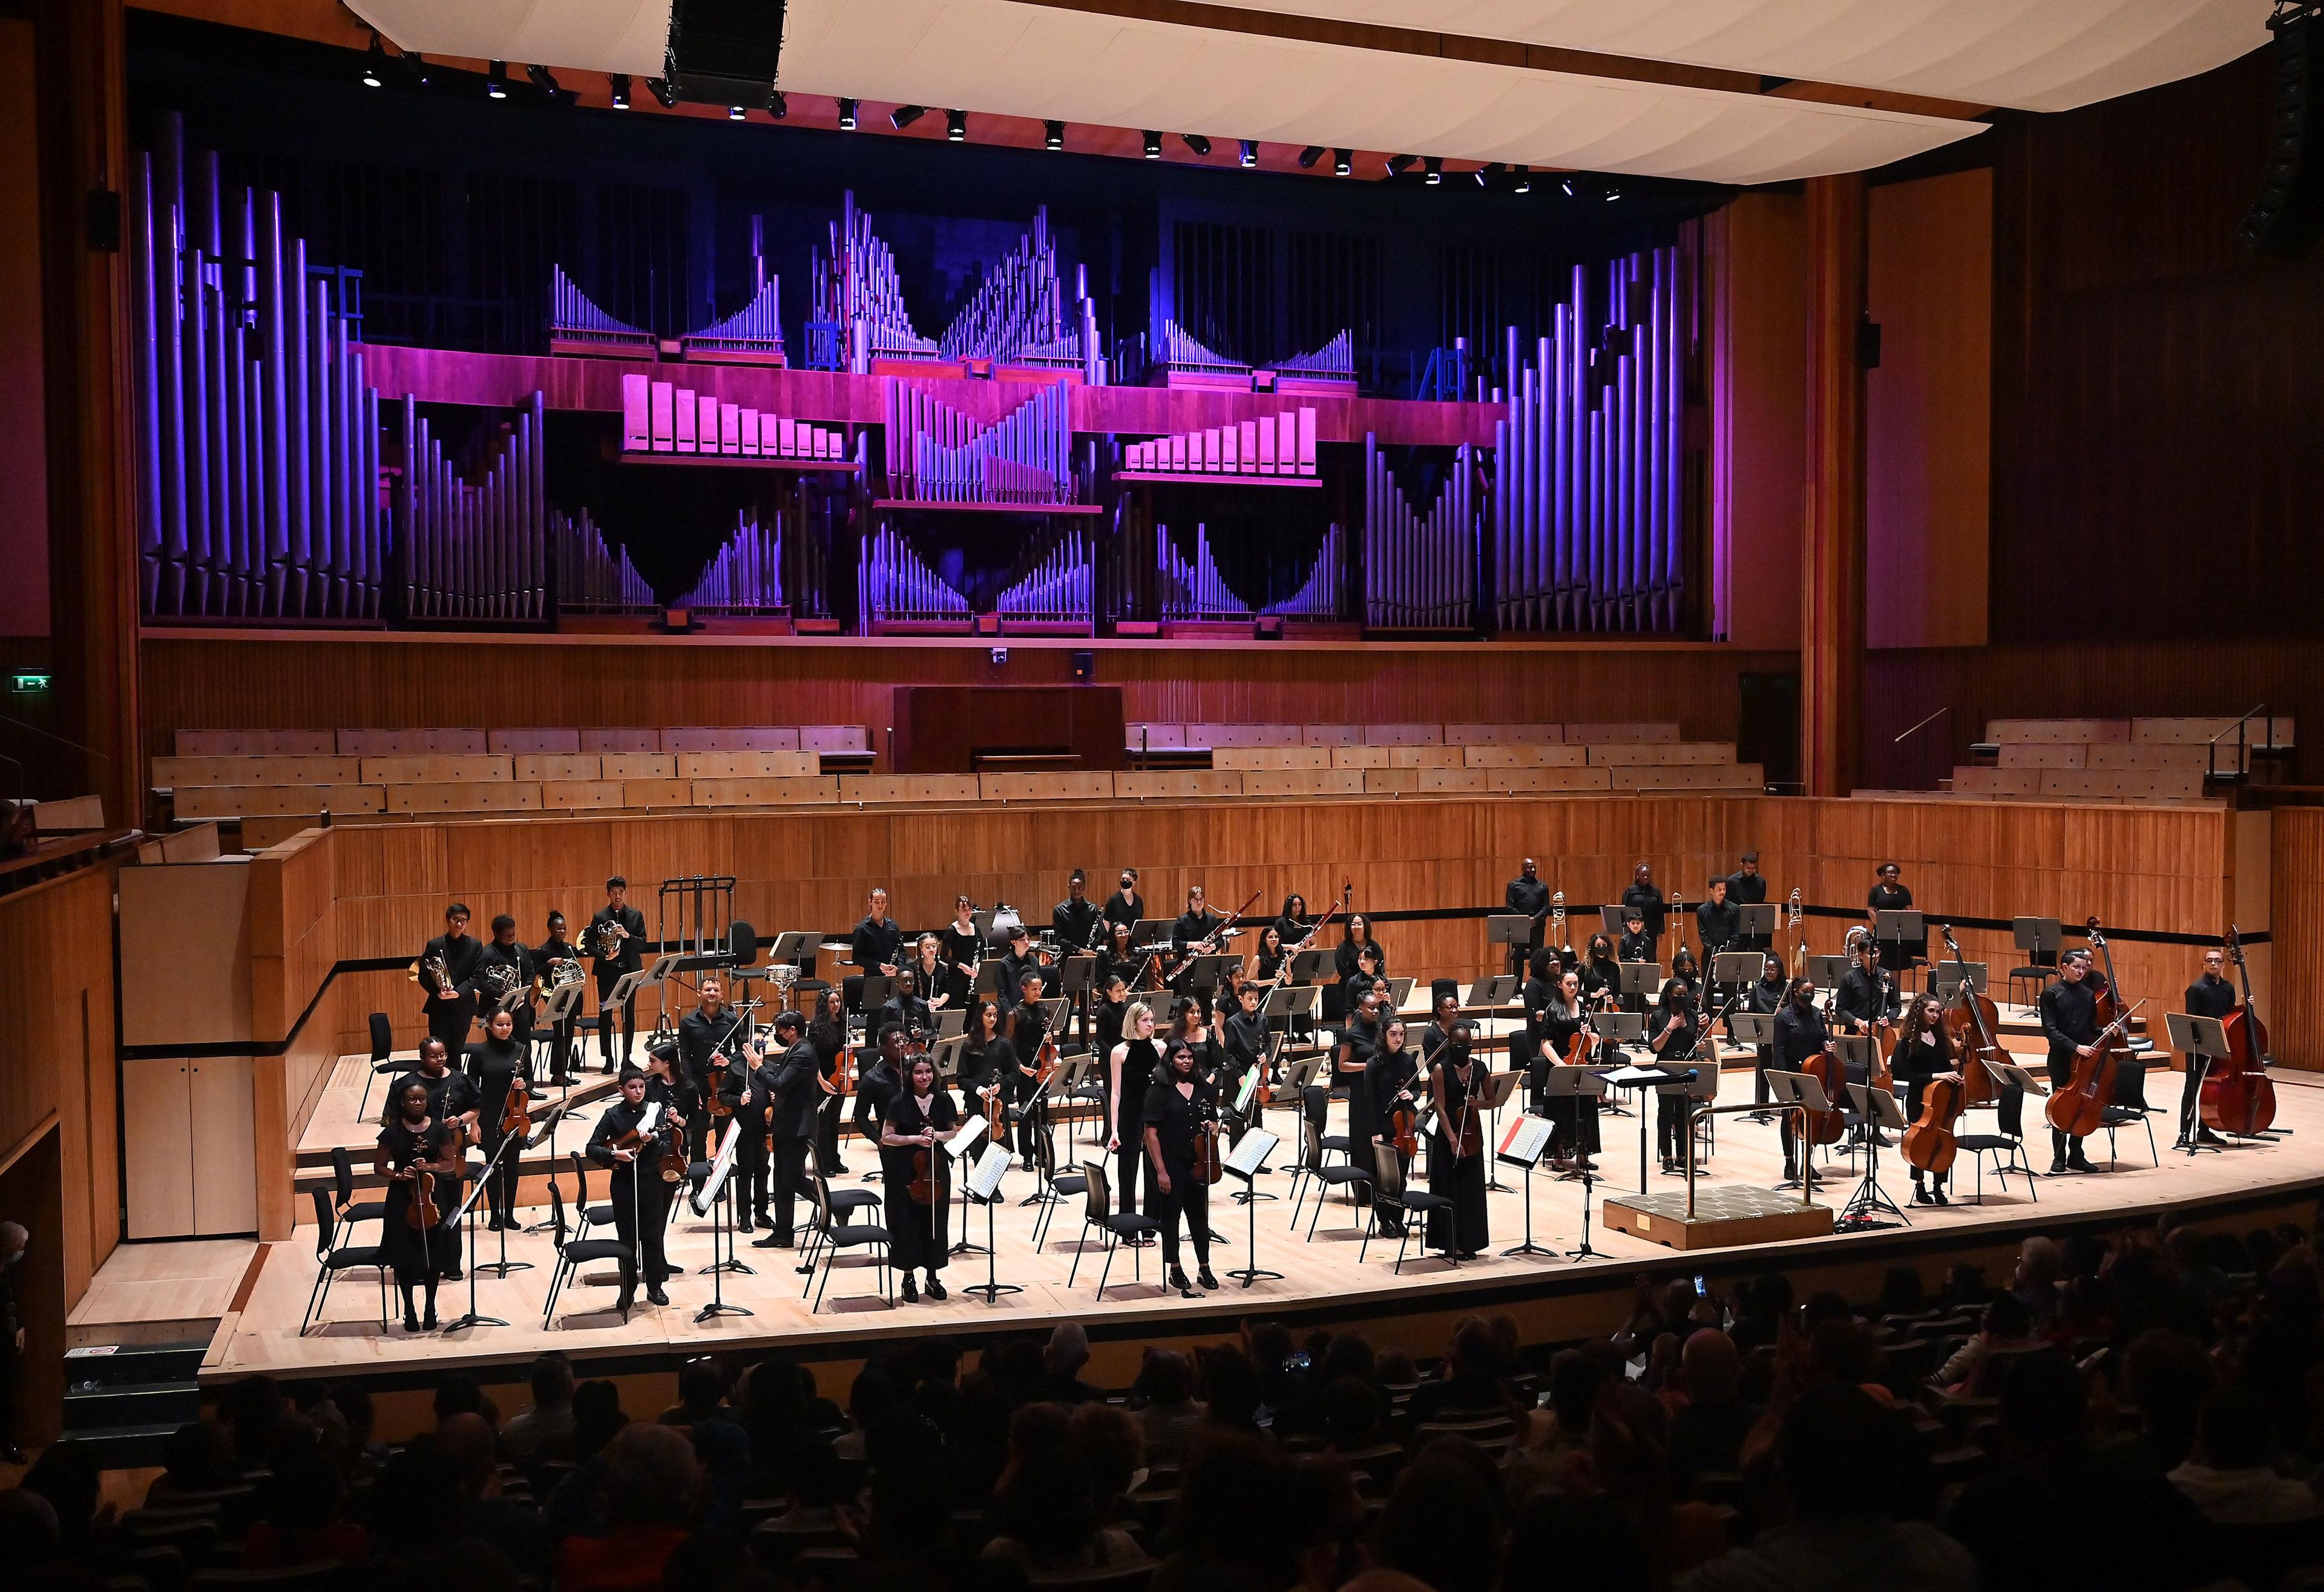 Chineke! Junior Orchestra on stage at the Royal Festival Hall